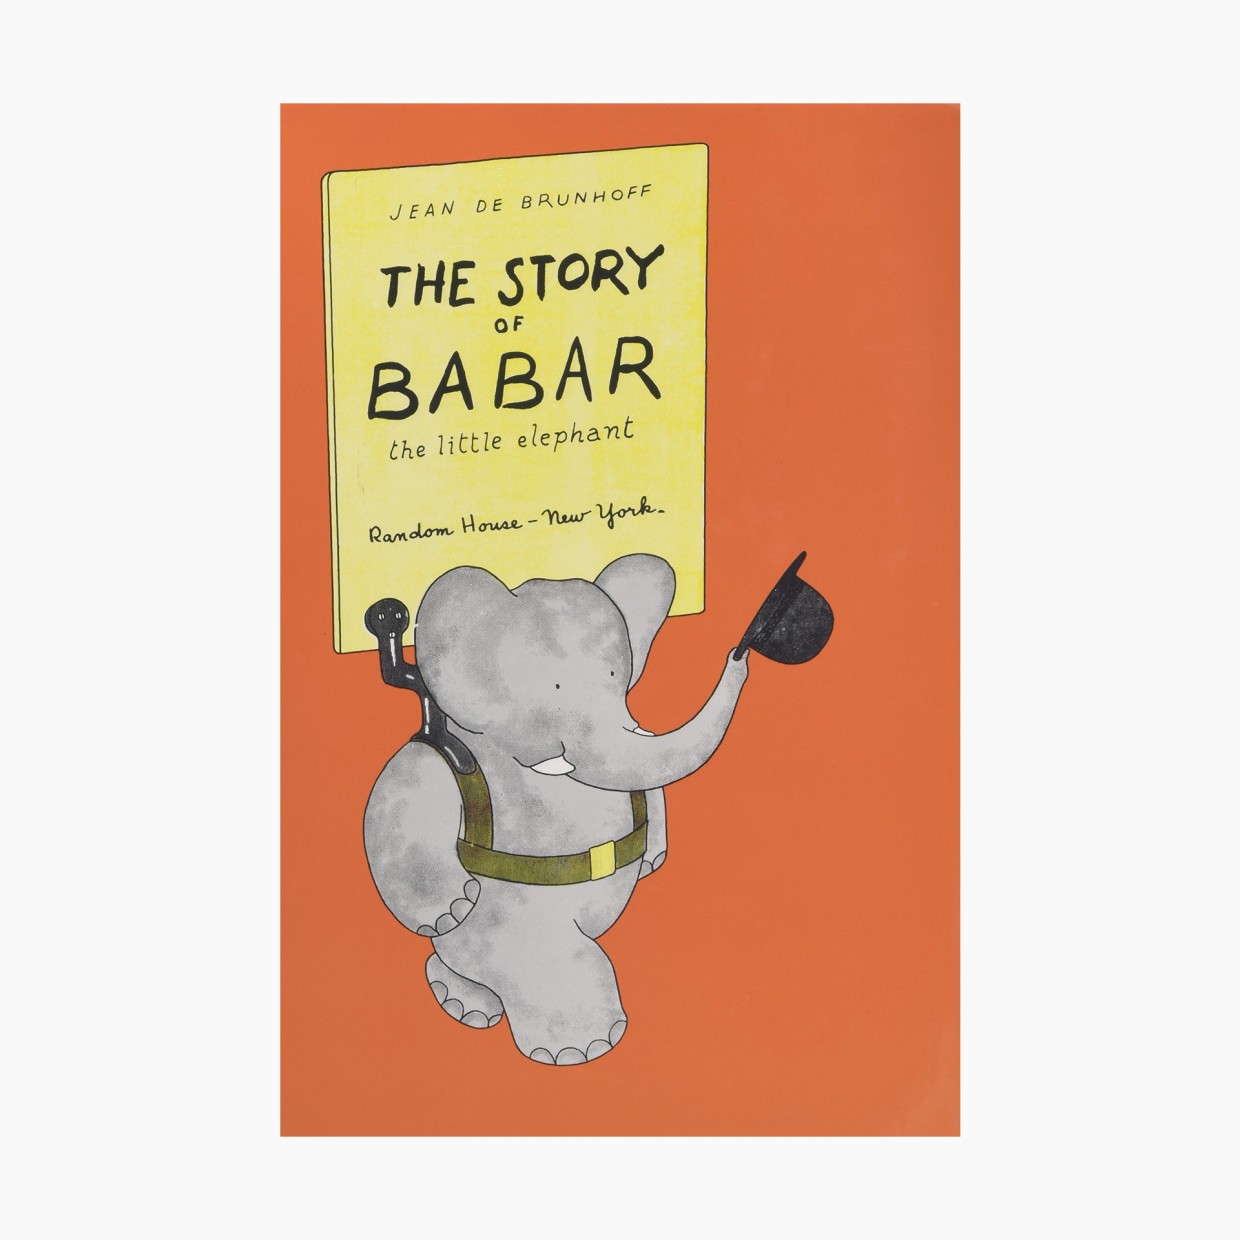 The Story of Babar the Little Elephant.